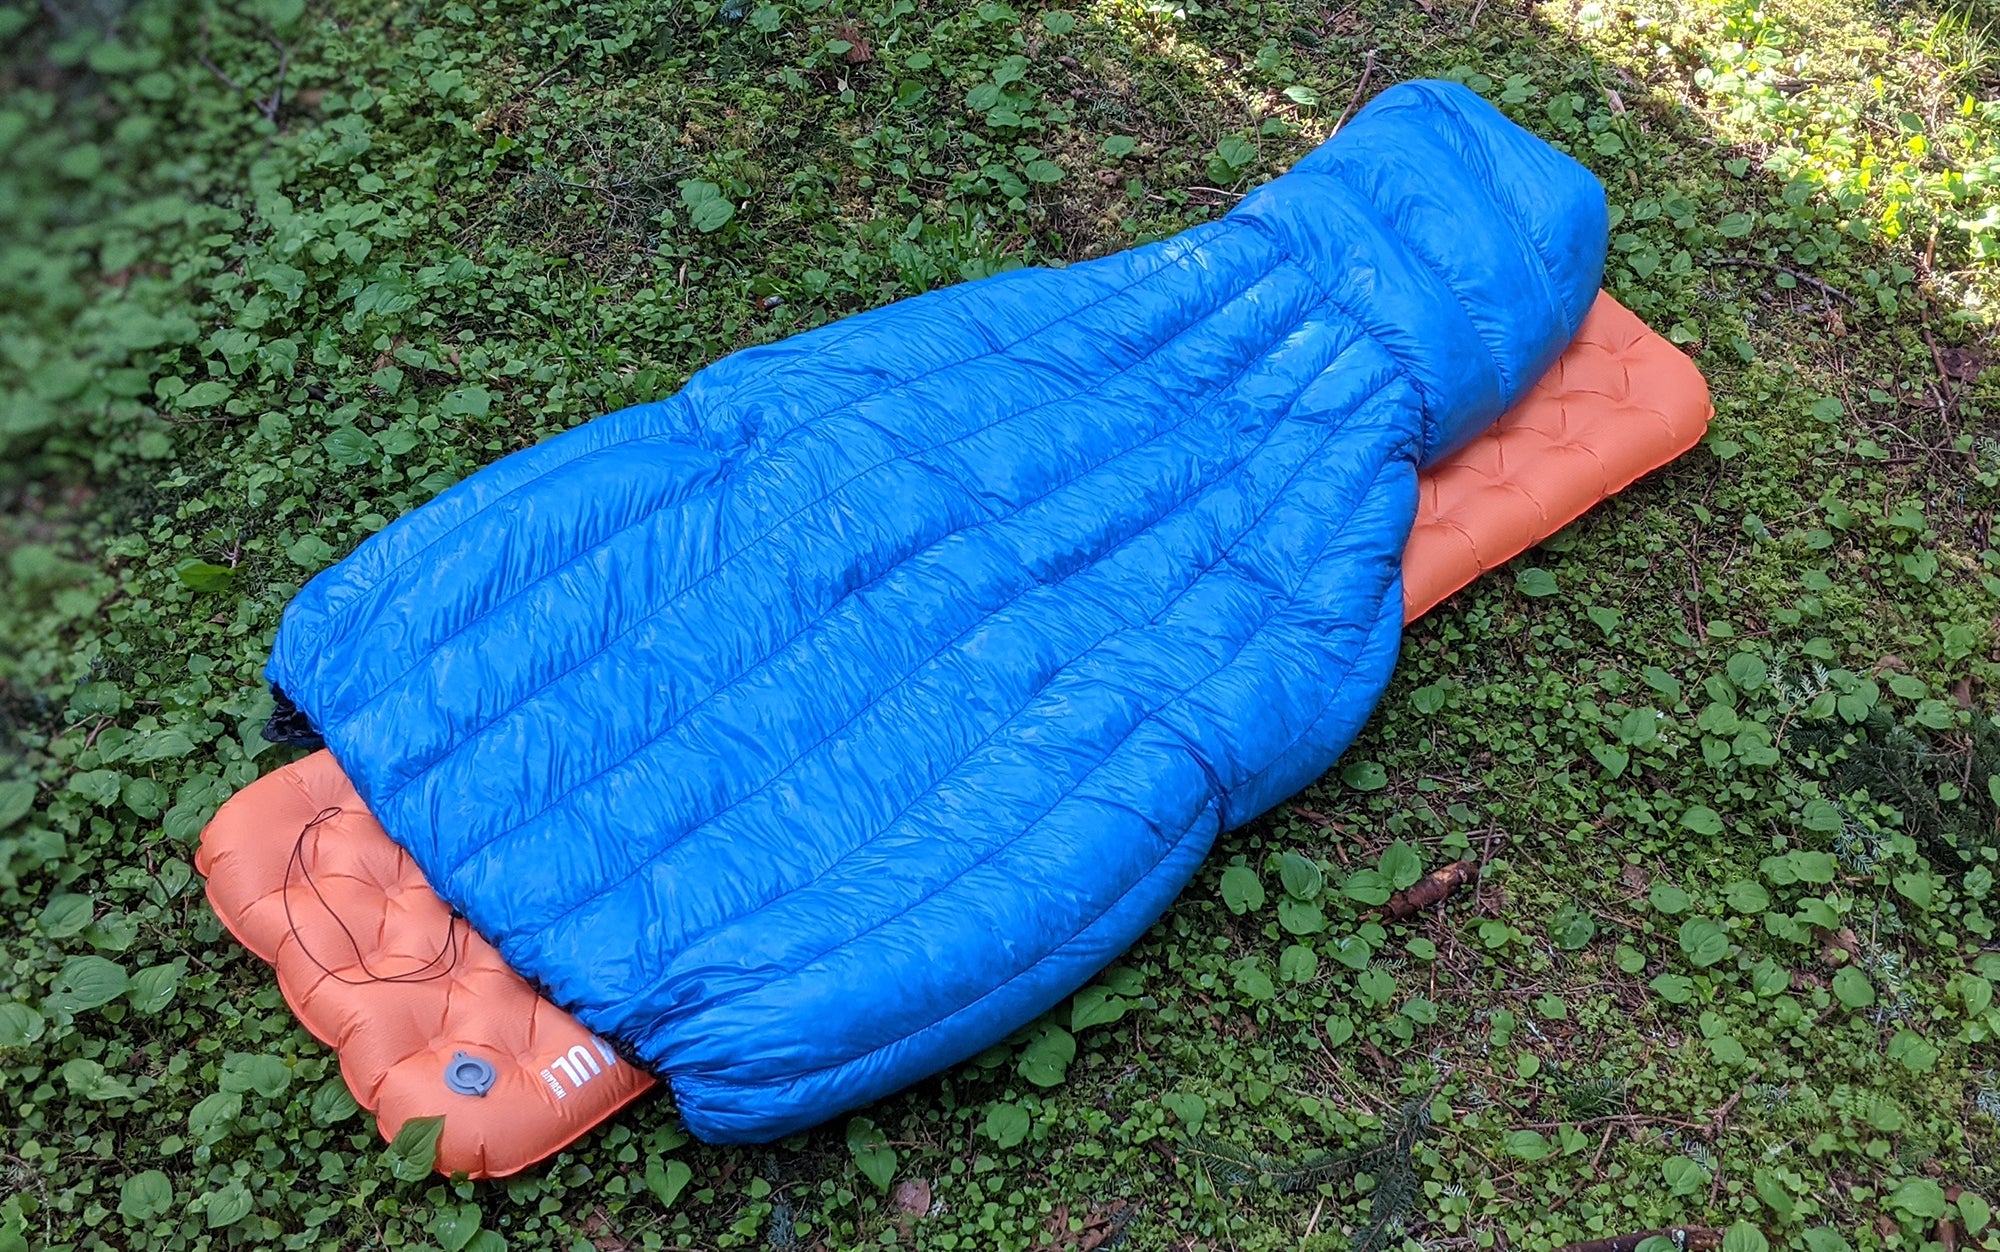 Quilts, not sleeping bags, are a great way to put kids to bed in the backcountry.